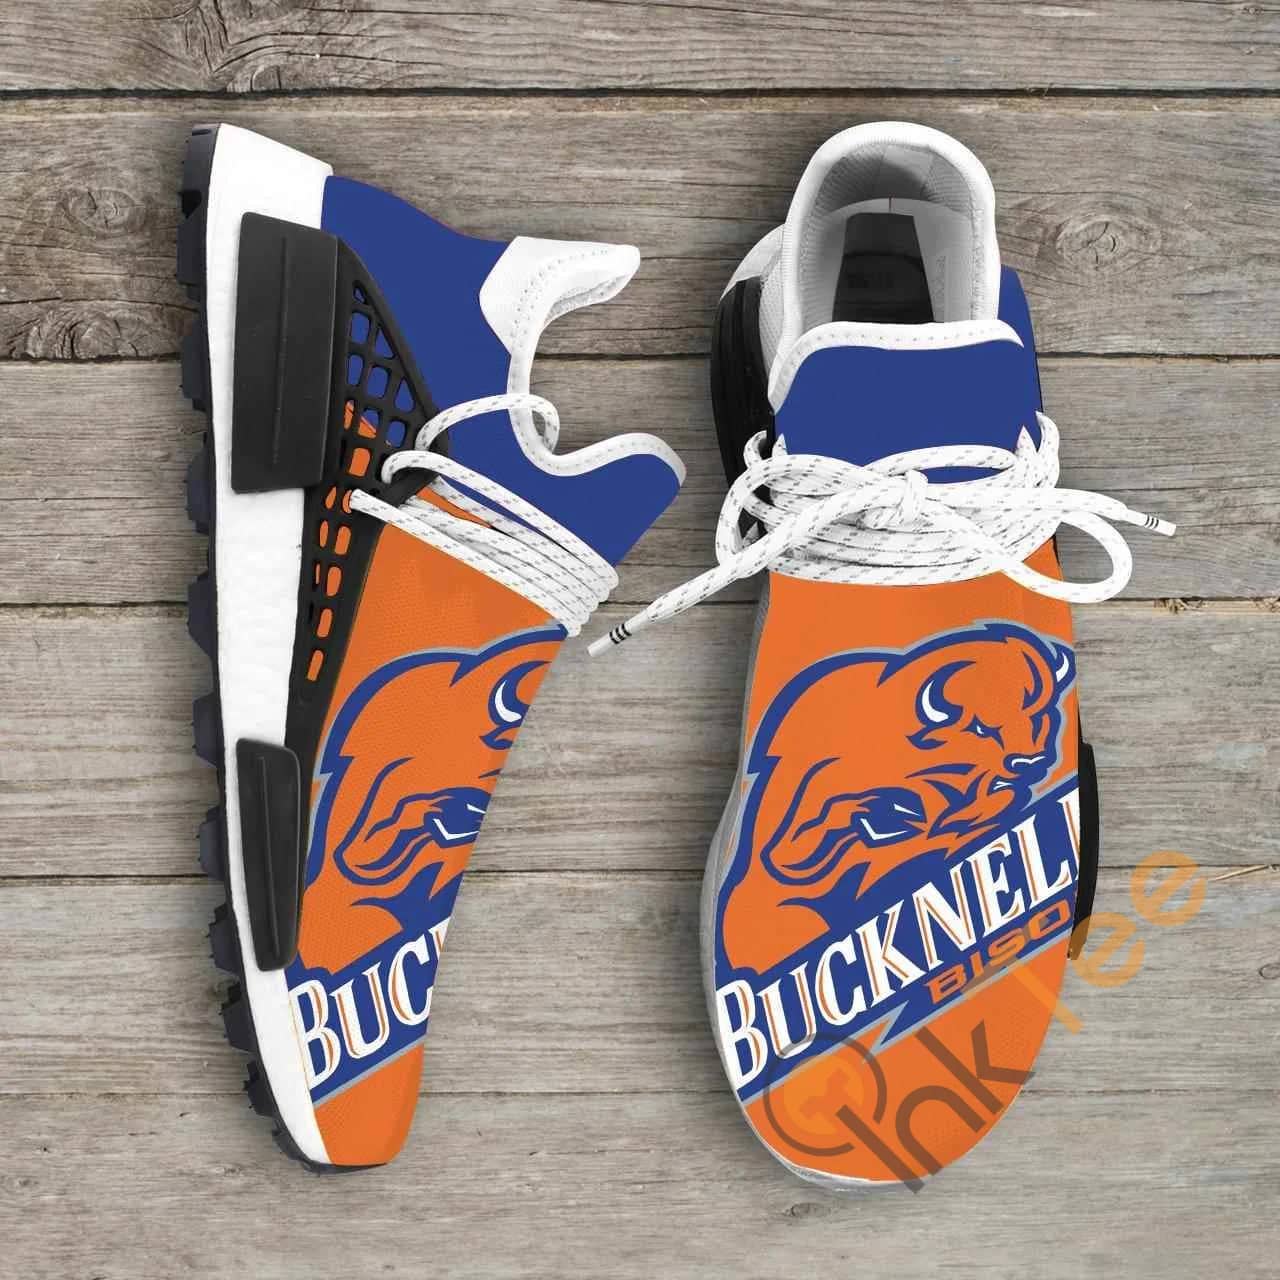 Bucknell Bison Ncaa NMD Human Shoes